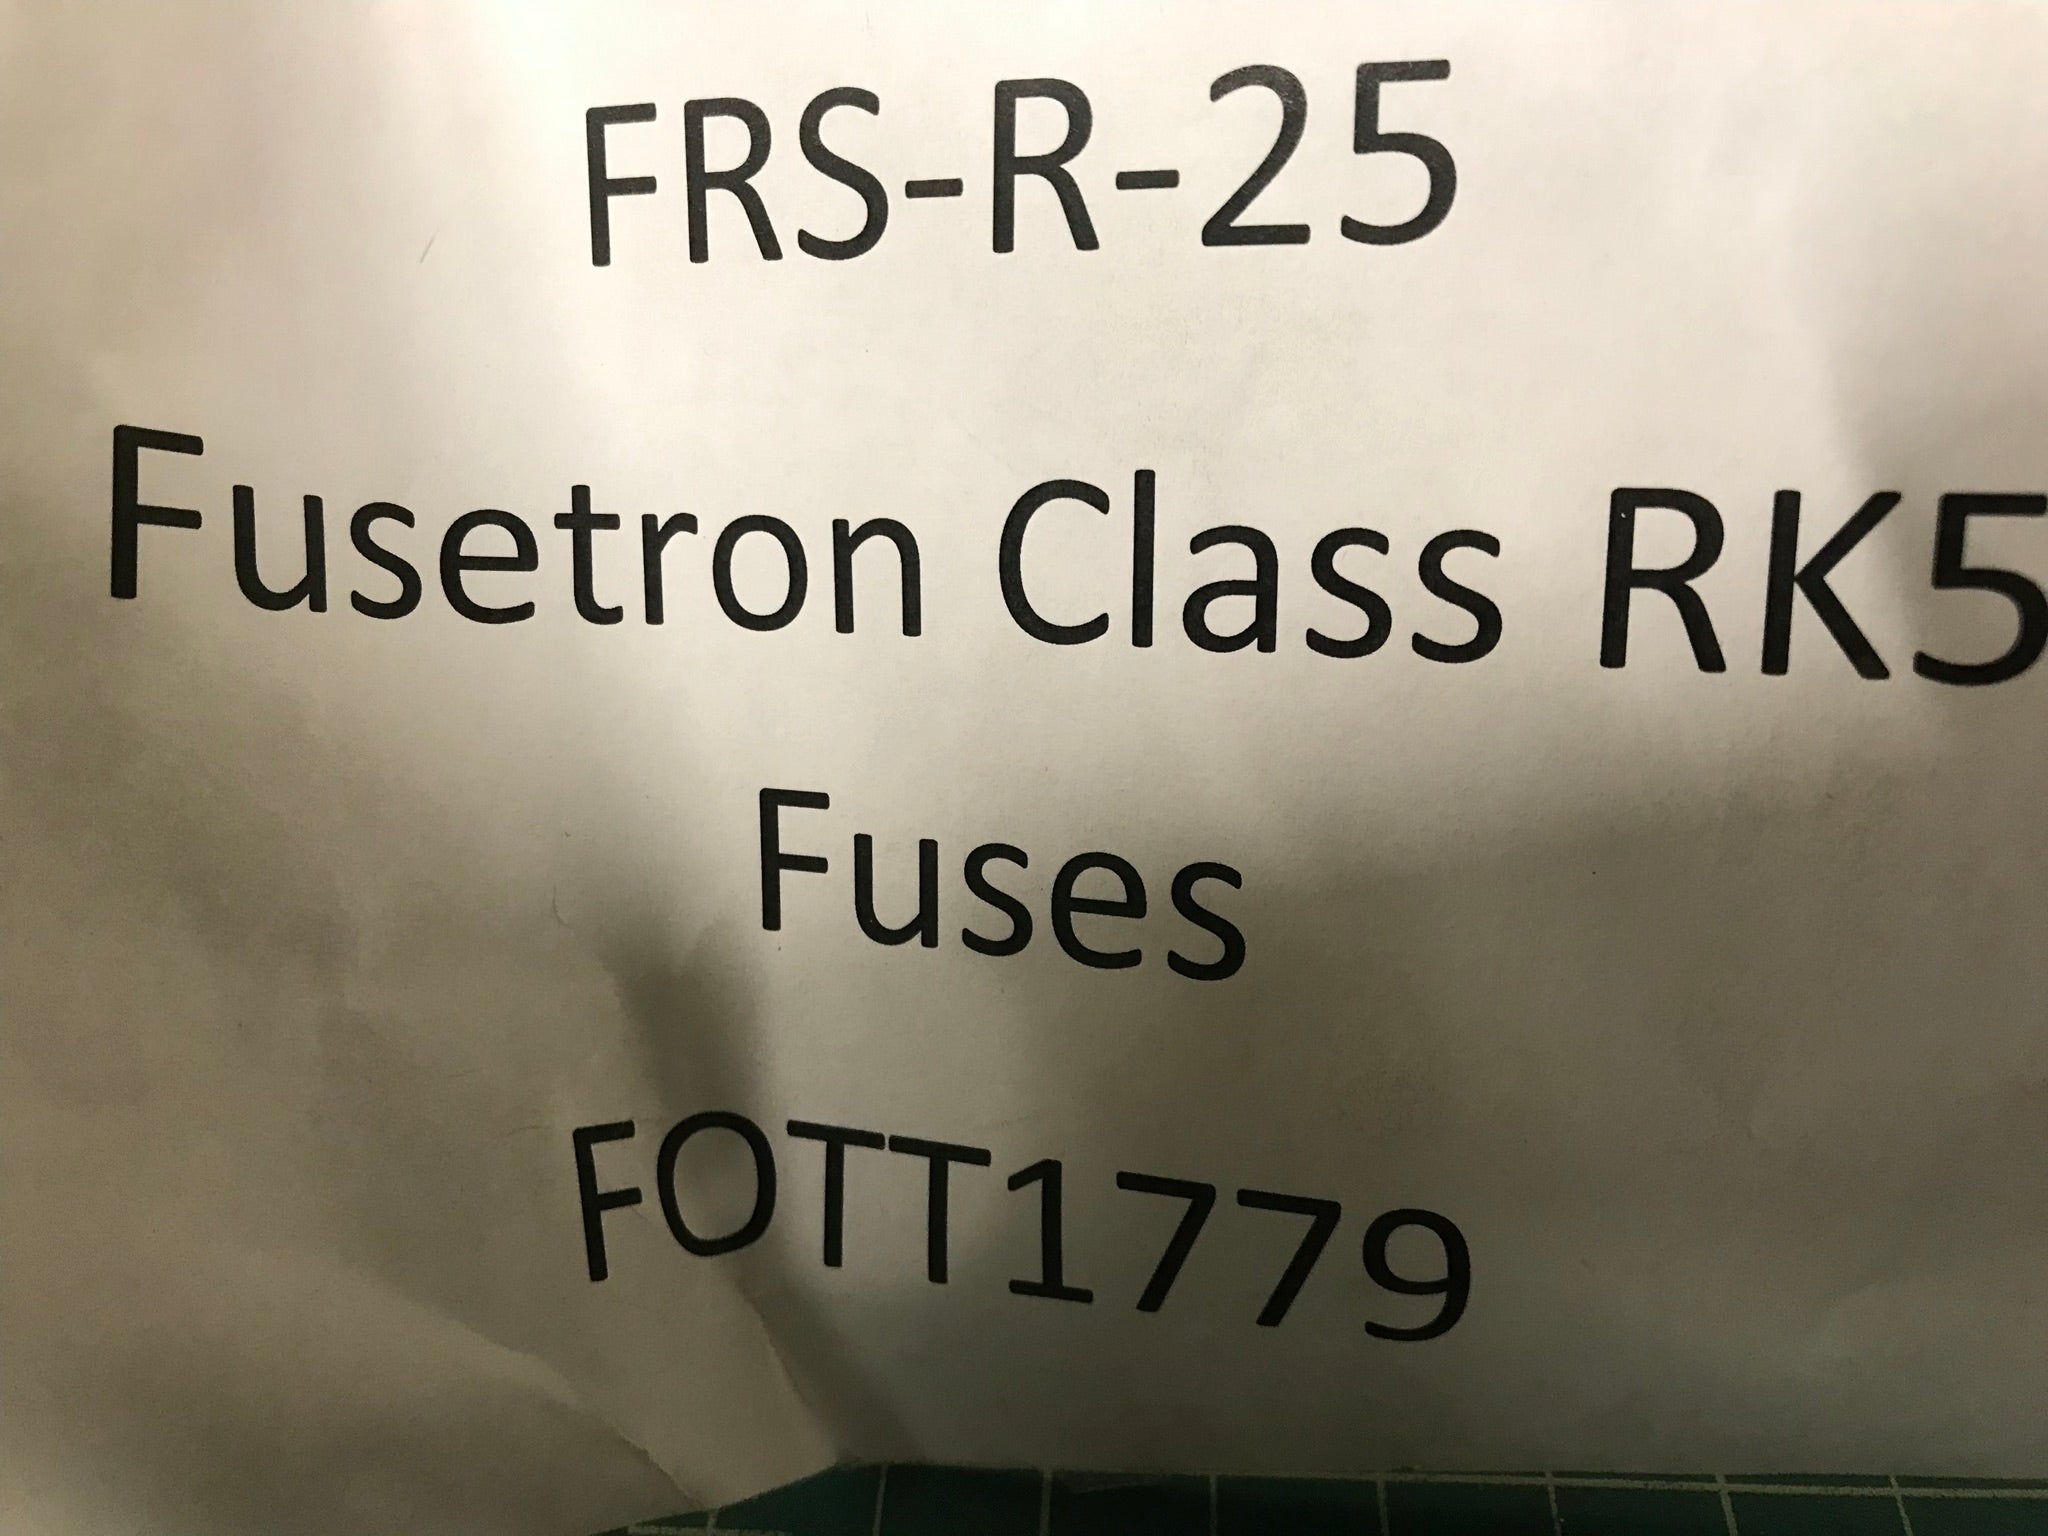 Fusetron Class RK5 Fuses